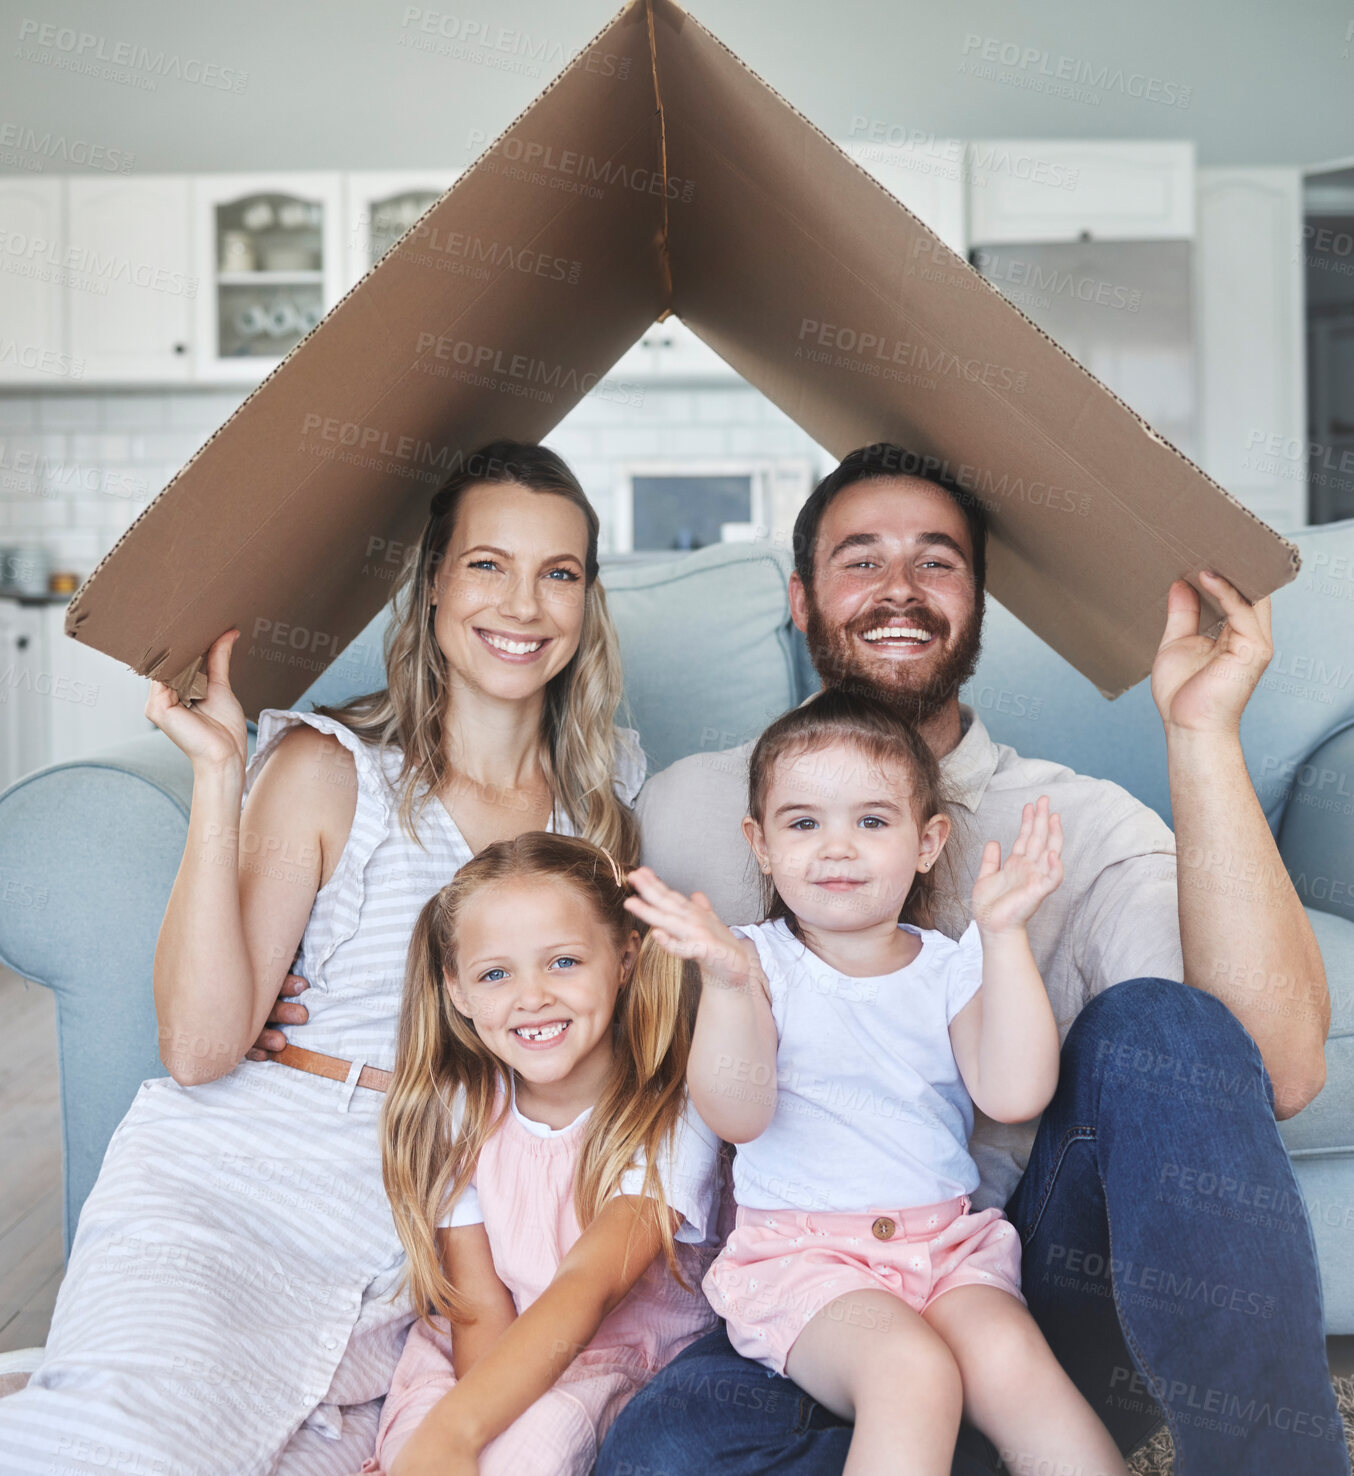 Buy stock photo Safety, happy and portrait of family with a roof or covering gesture with cardboard in the living room. Happiness, smile and home insurance of parents with girl children for protection in their house